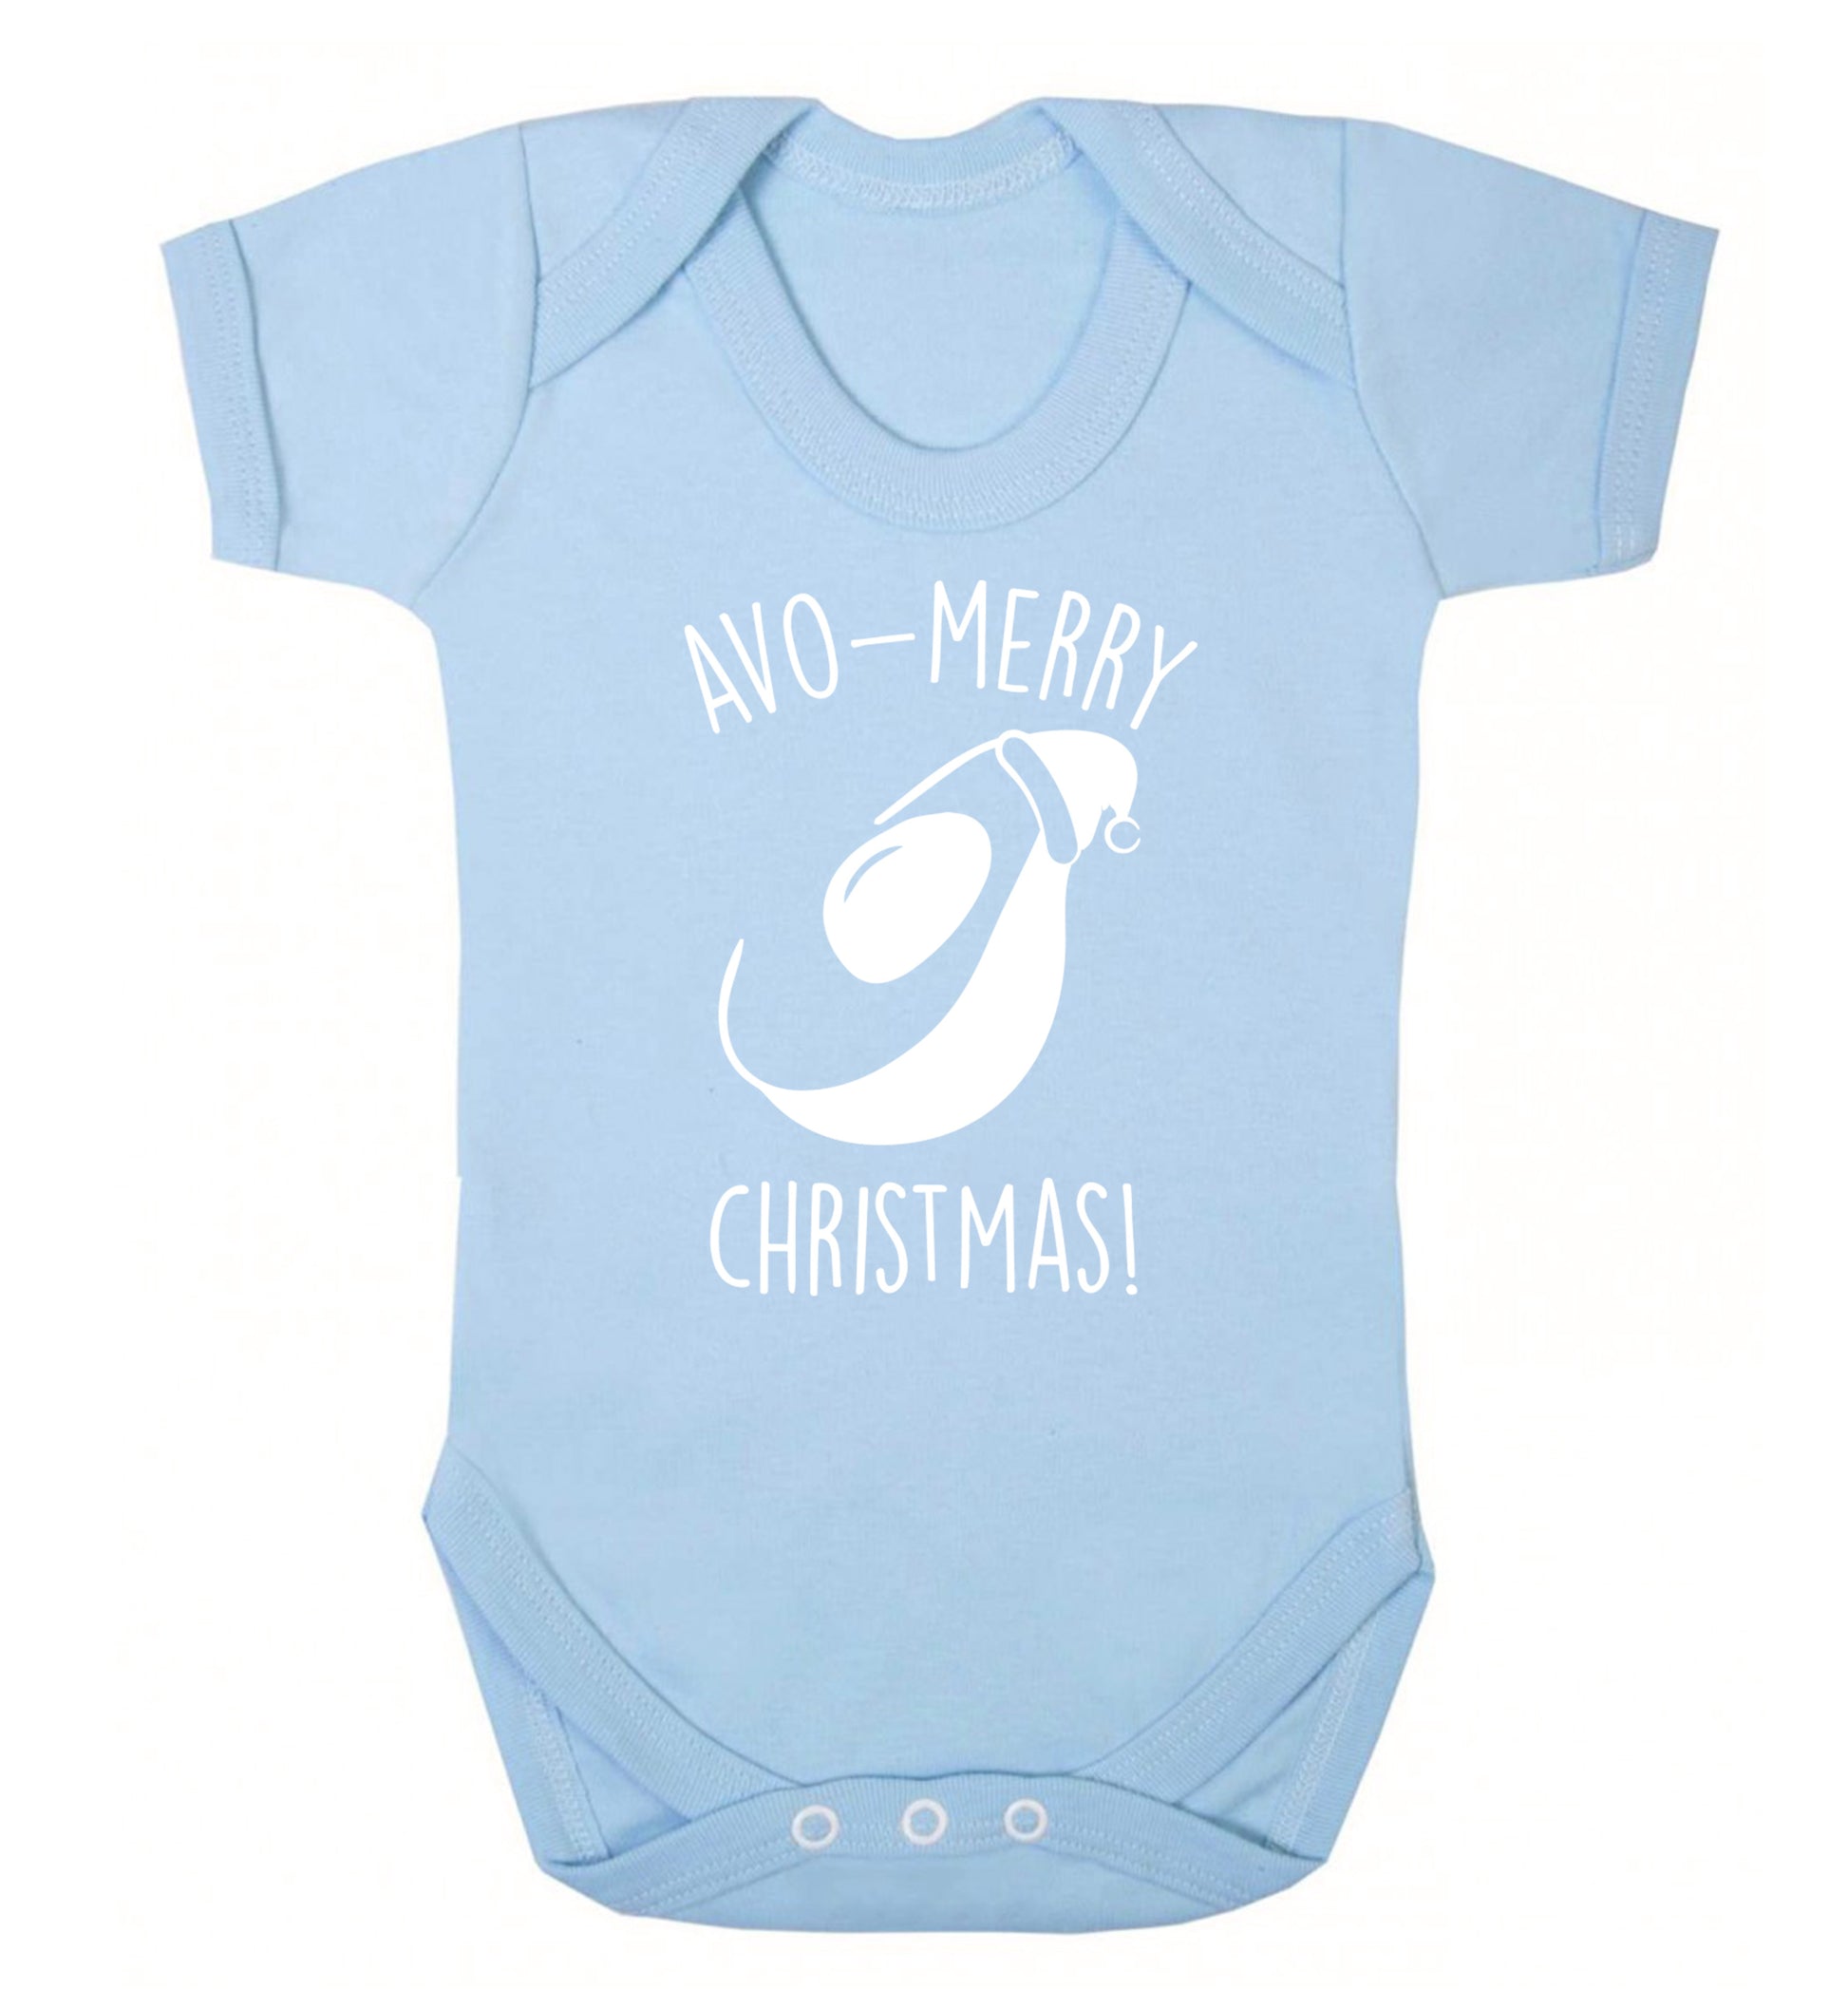 Avo-Merry Christmas Baby Vest pale blue 18-24 months